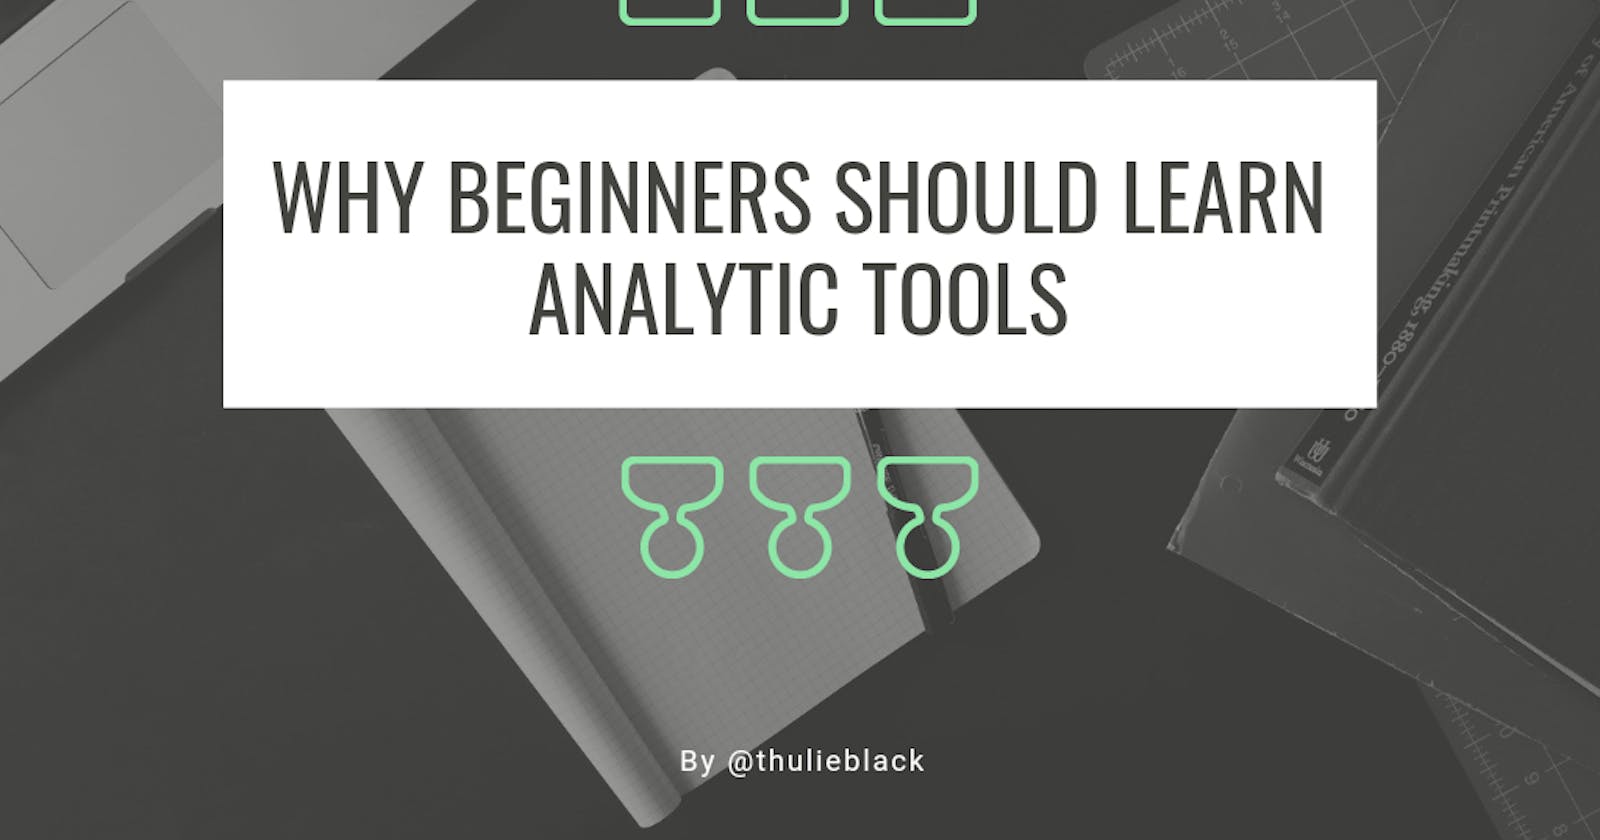 Why Beginners Should Learn Analytic Tools